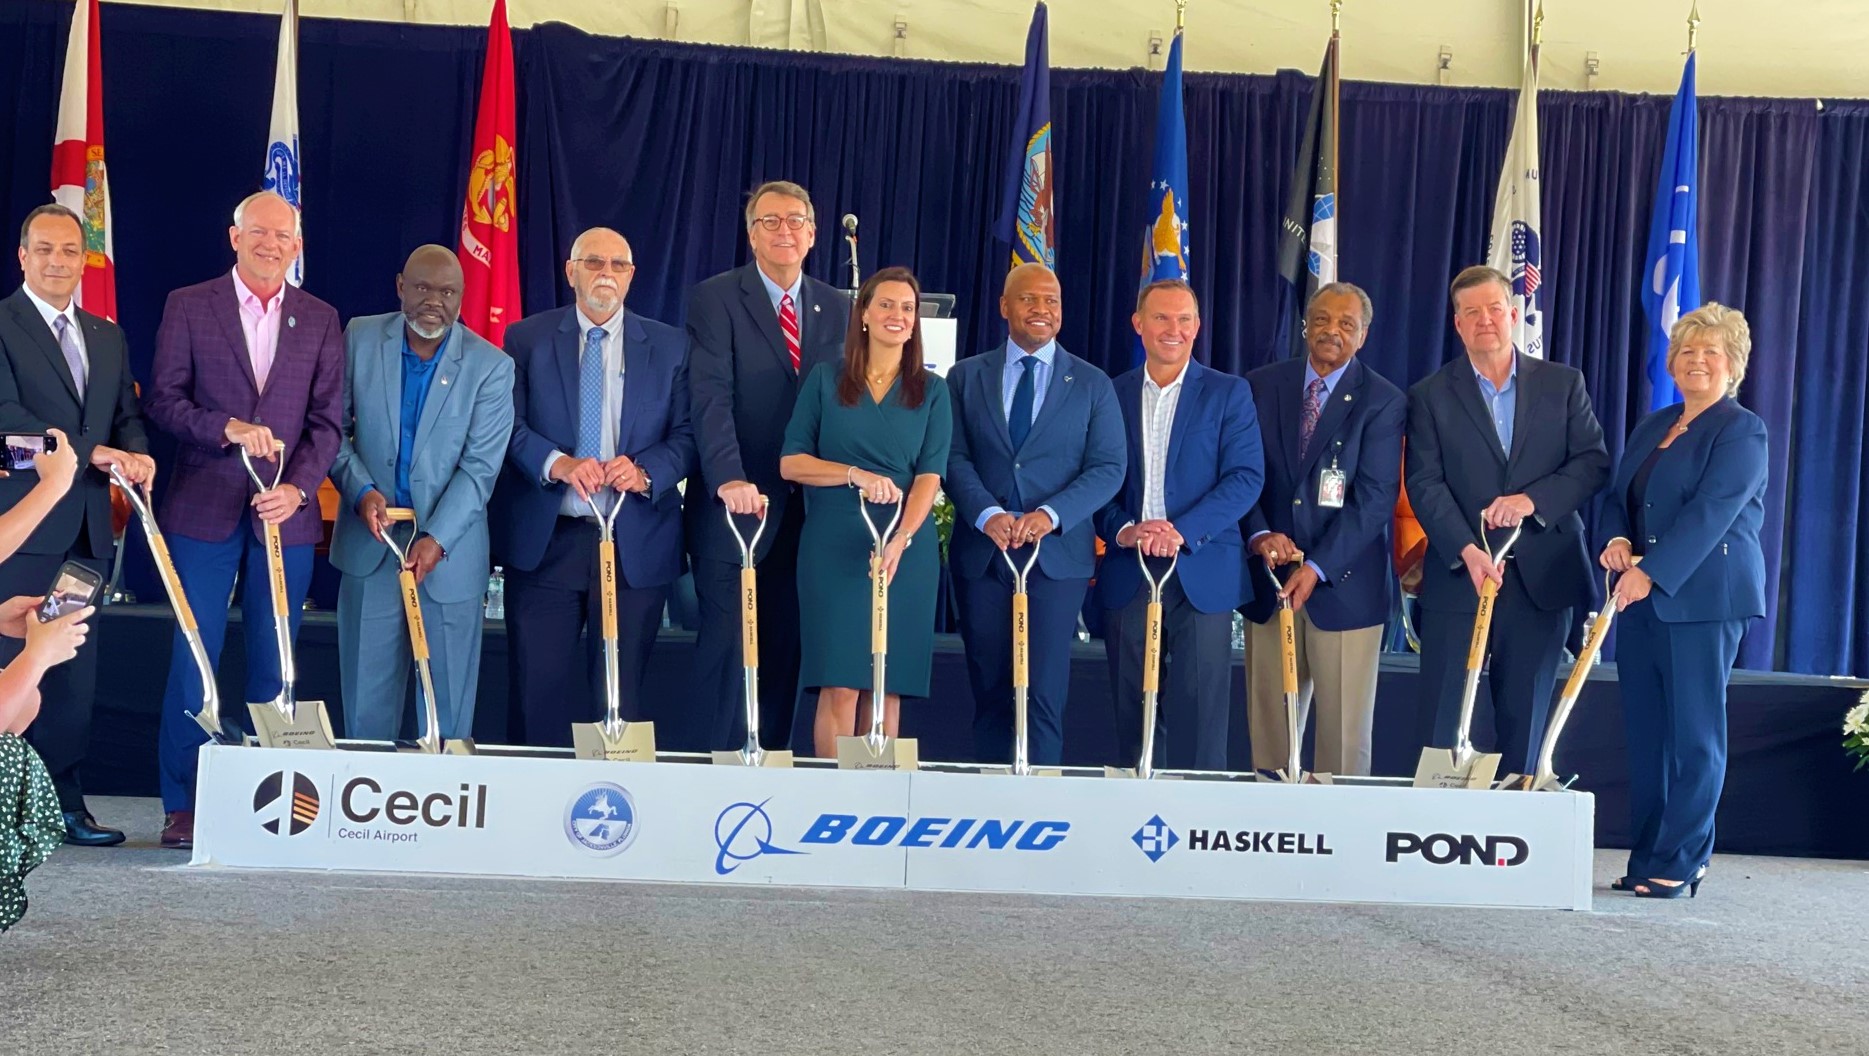 Boeing   and  Jacksonville  Aviation  Authority (JAA)  break  ground  on  $116  million  Cecil  Airport  new  maintenance  facility  to  bring  300  new  jobs !